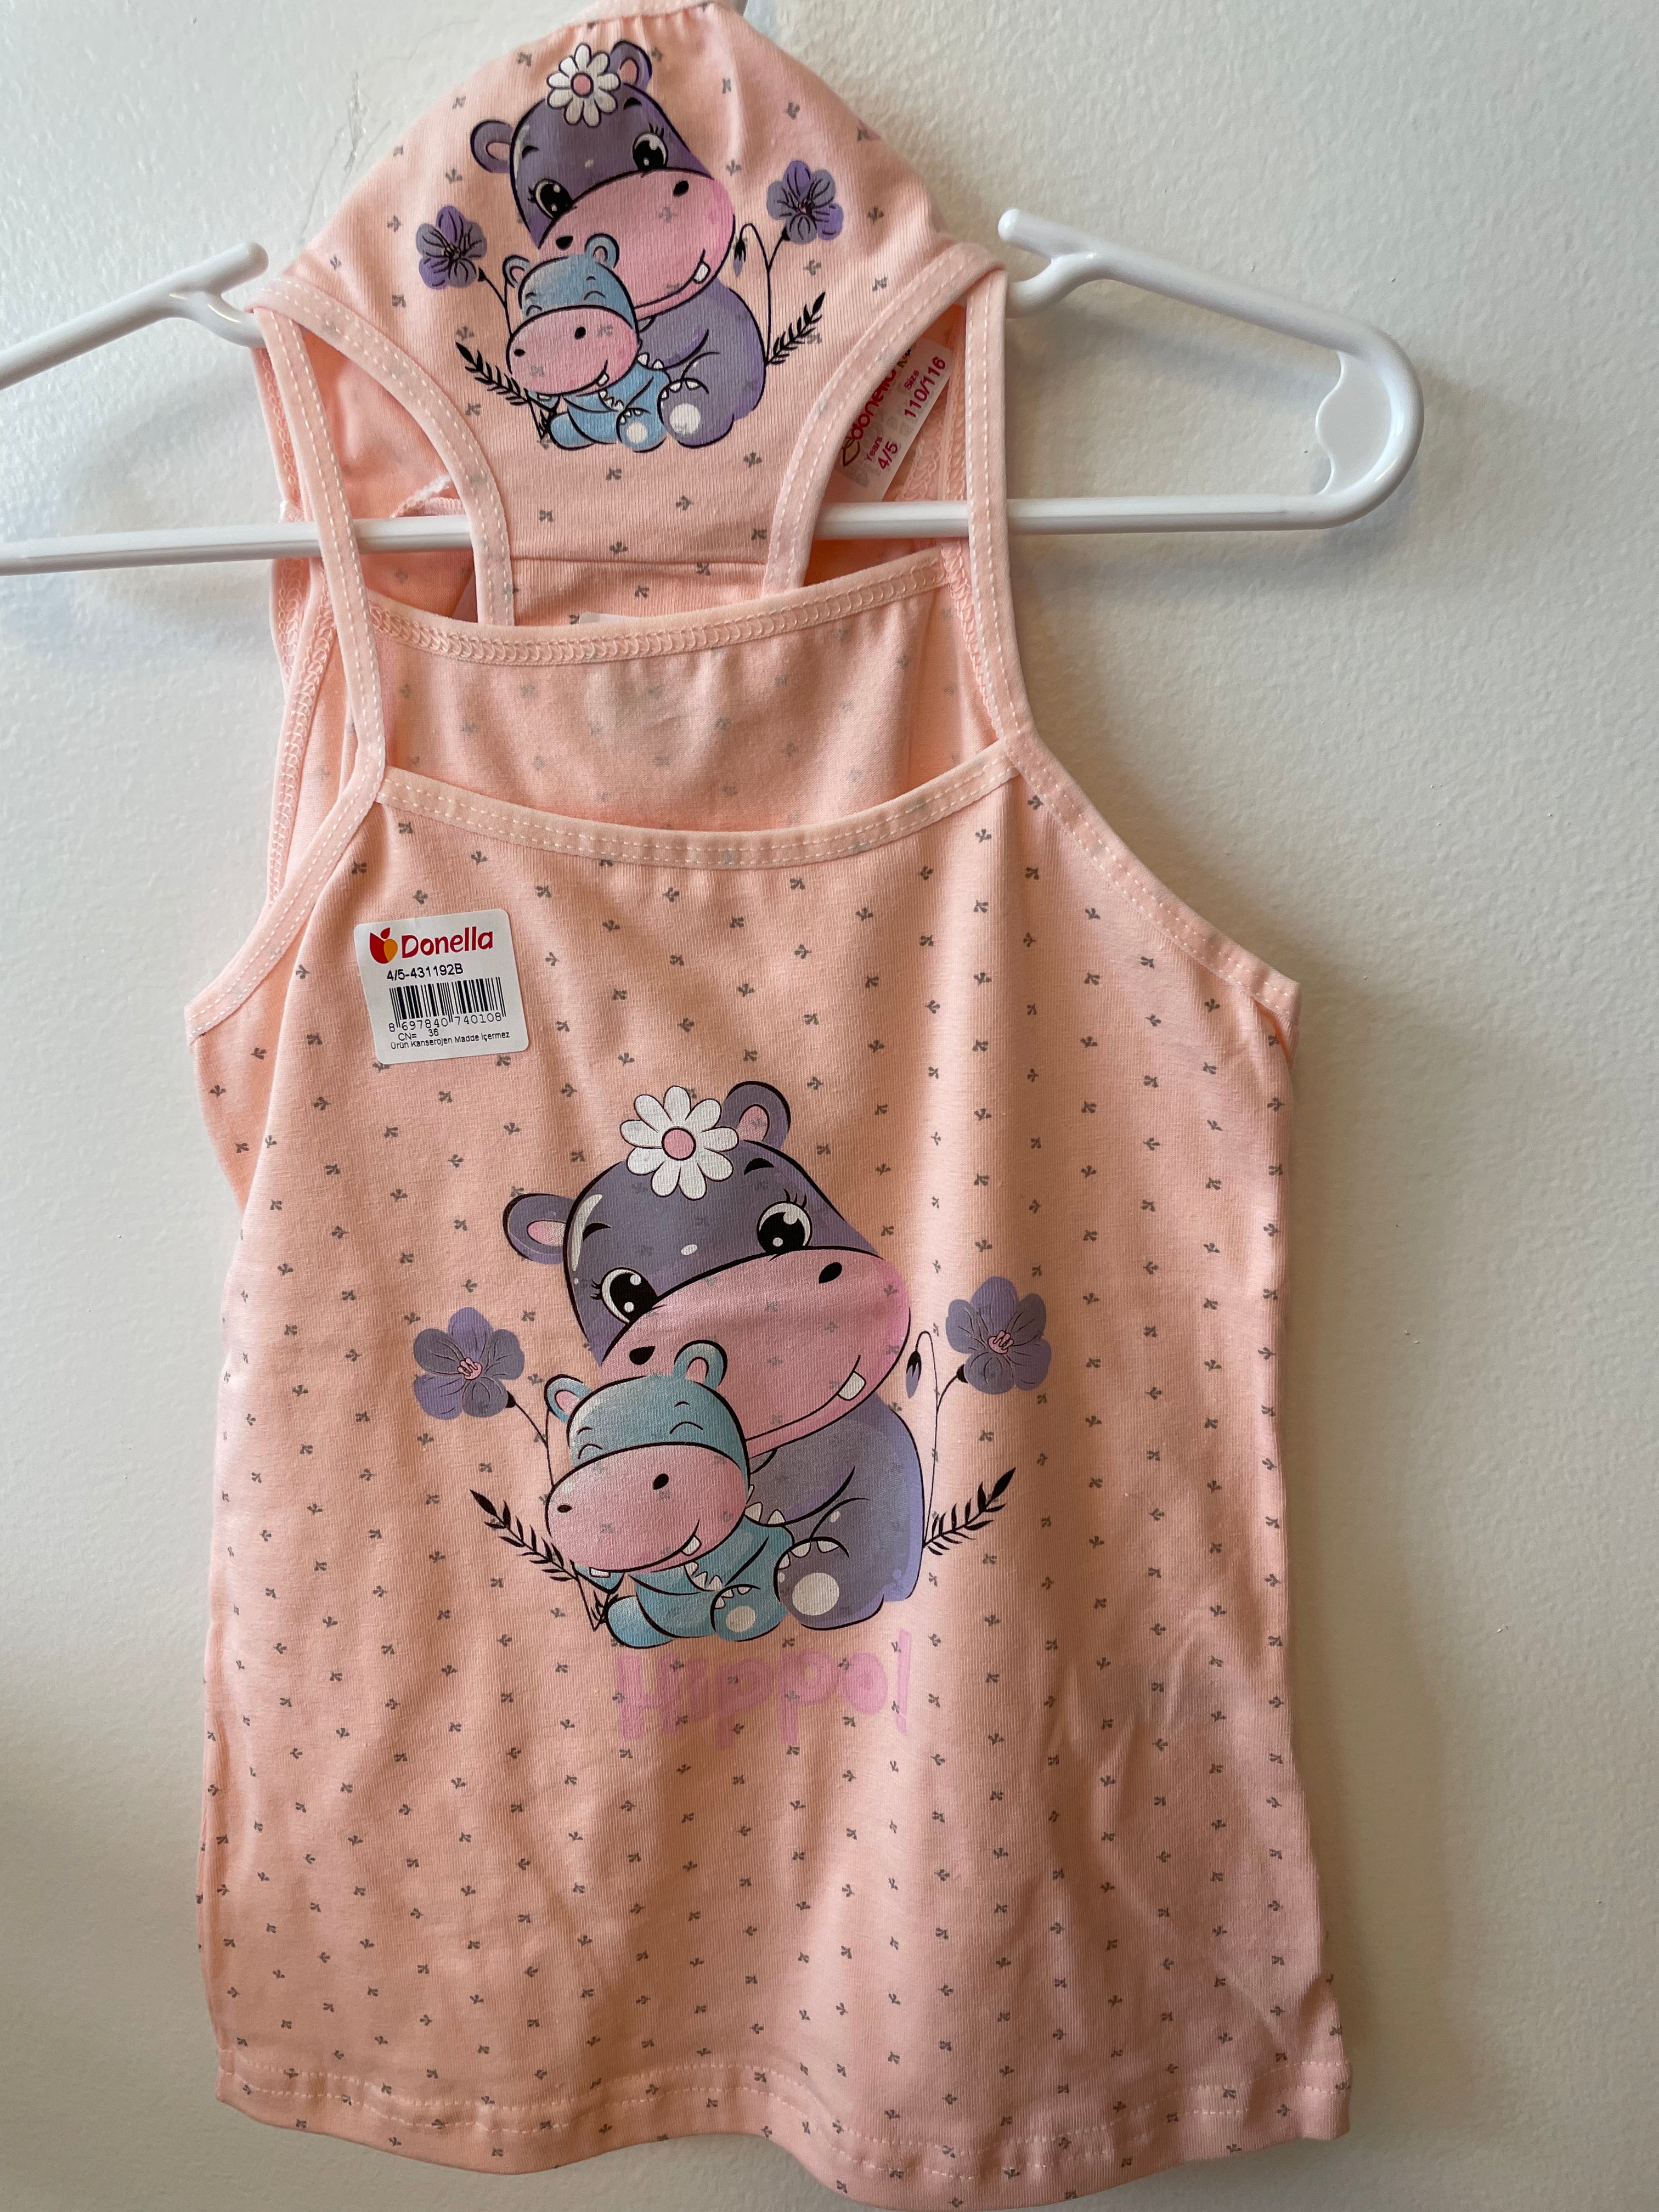 Comfy 100% Cotton Underwear Set with Hippo Graphic